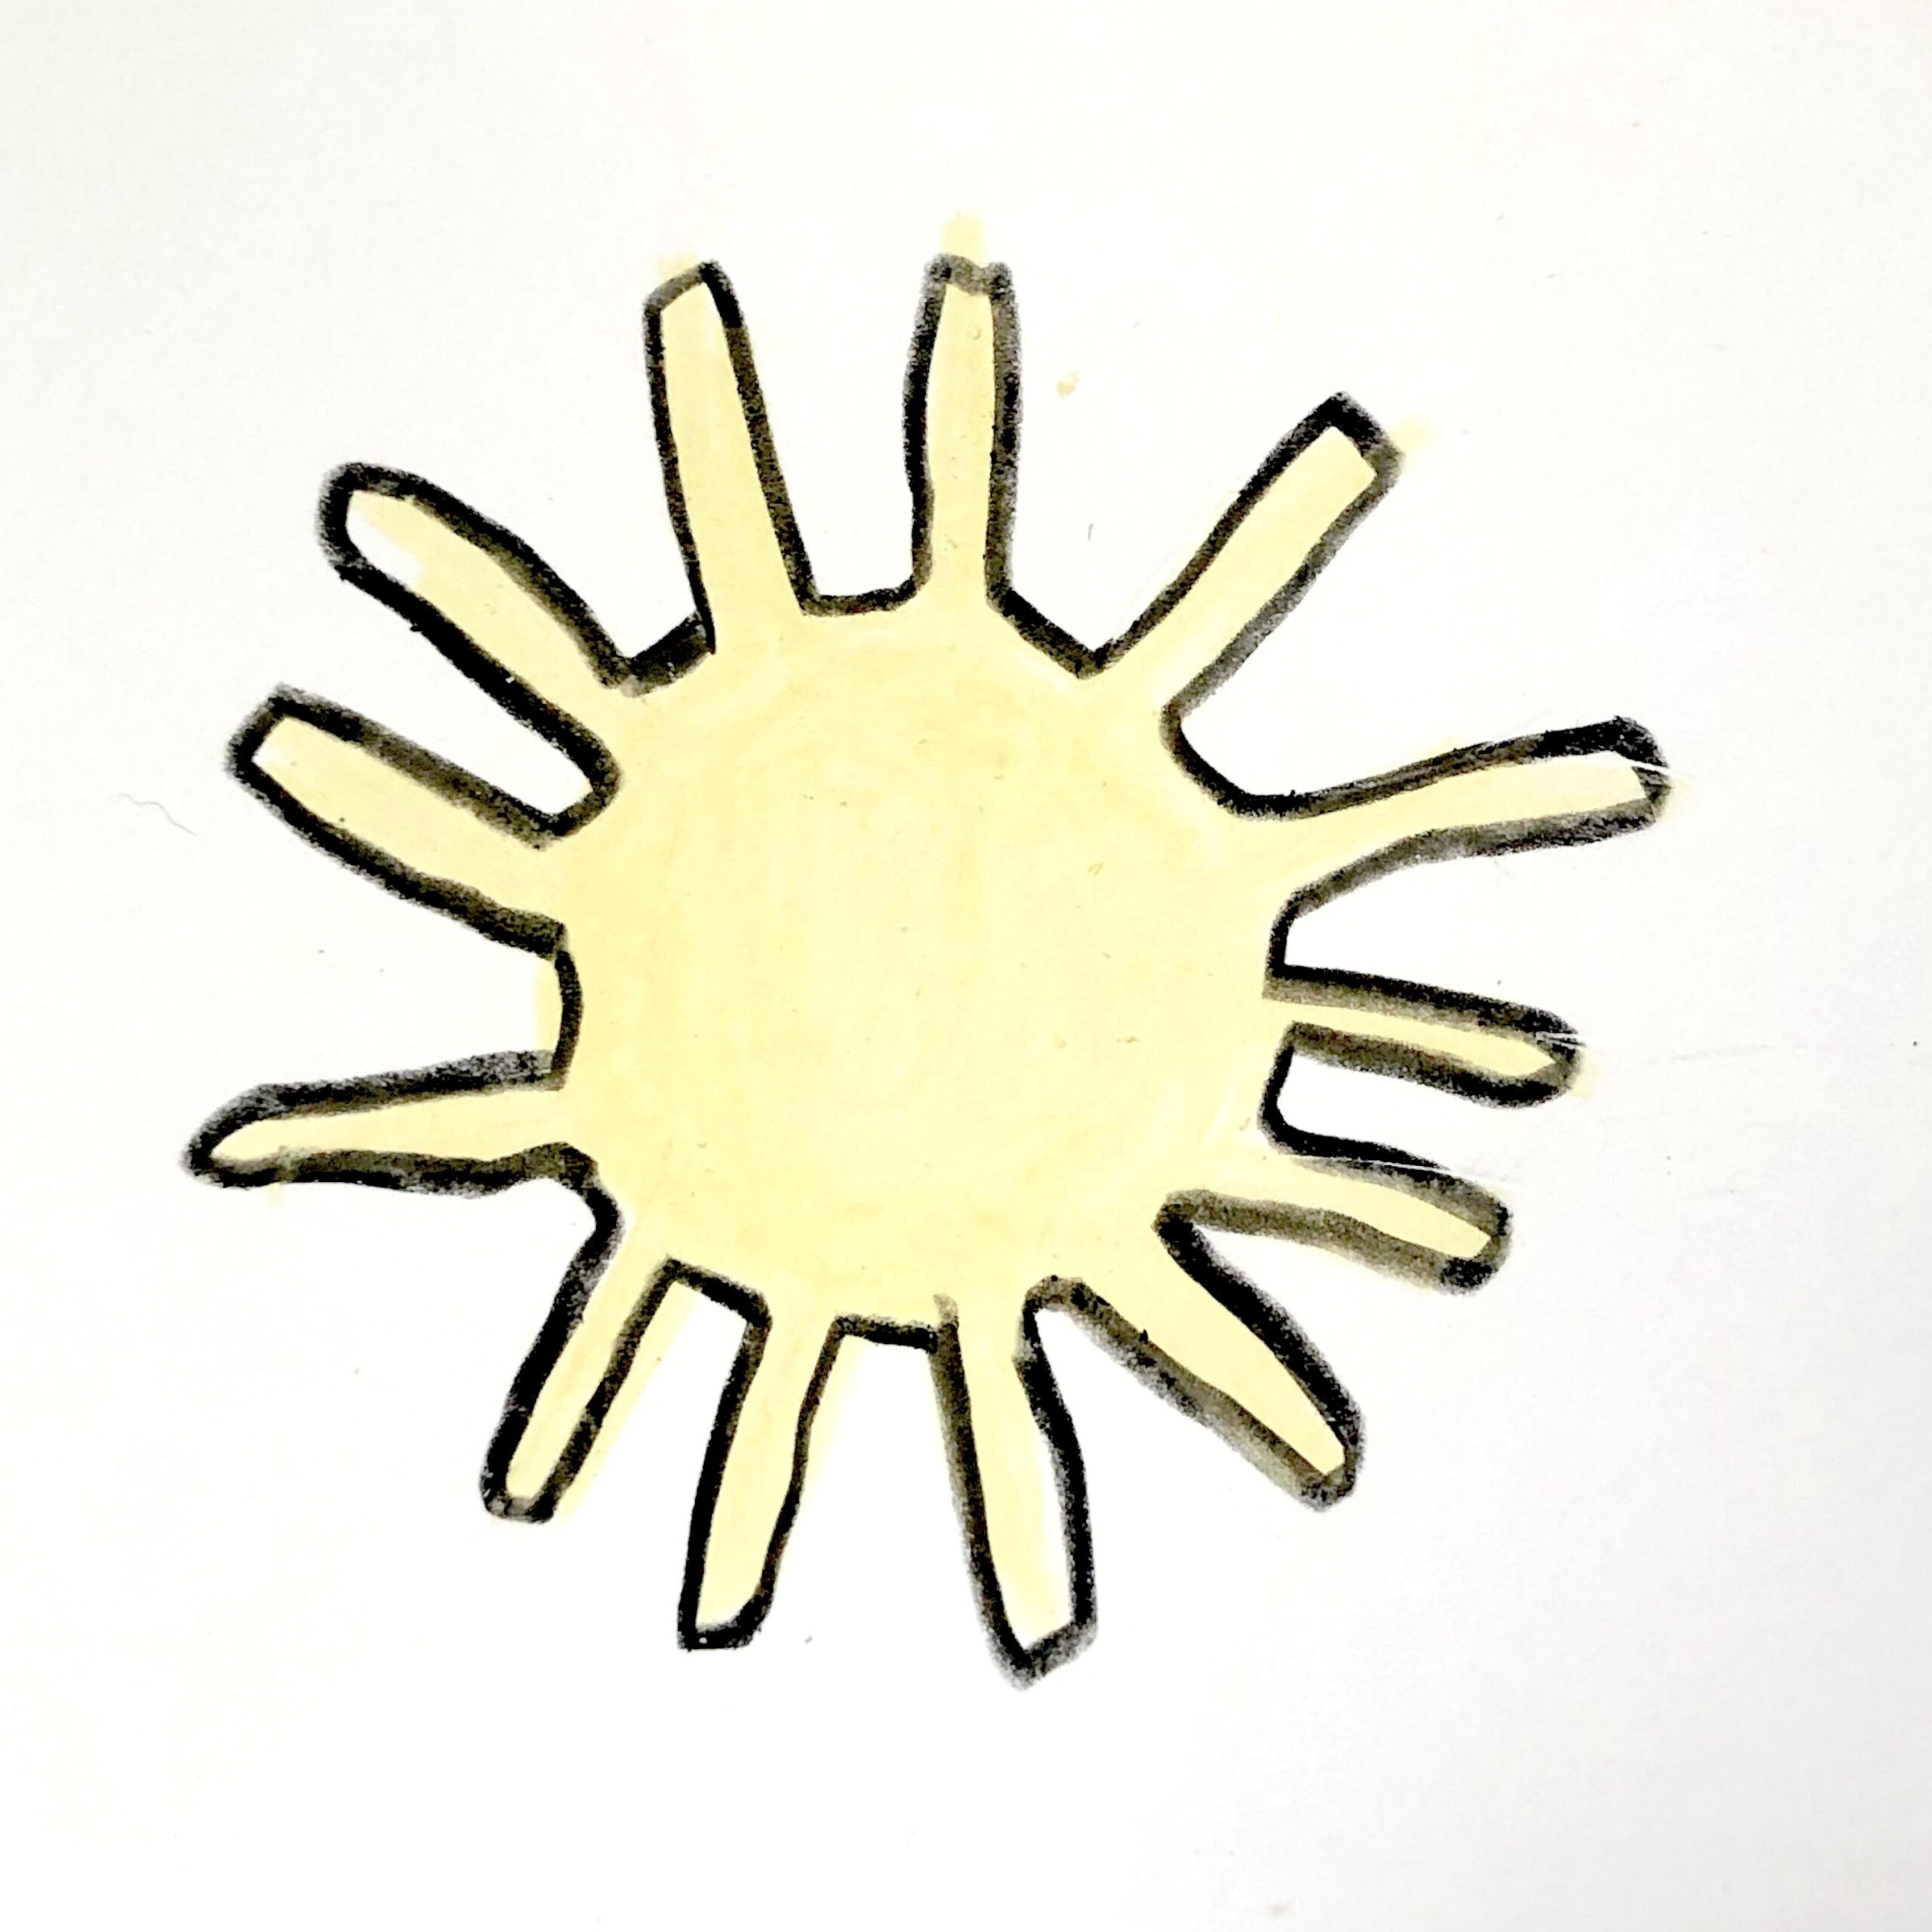 A pencil crayon drawing of a pale sun with thick black outline on a white background